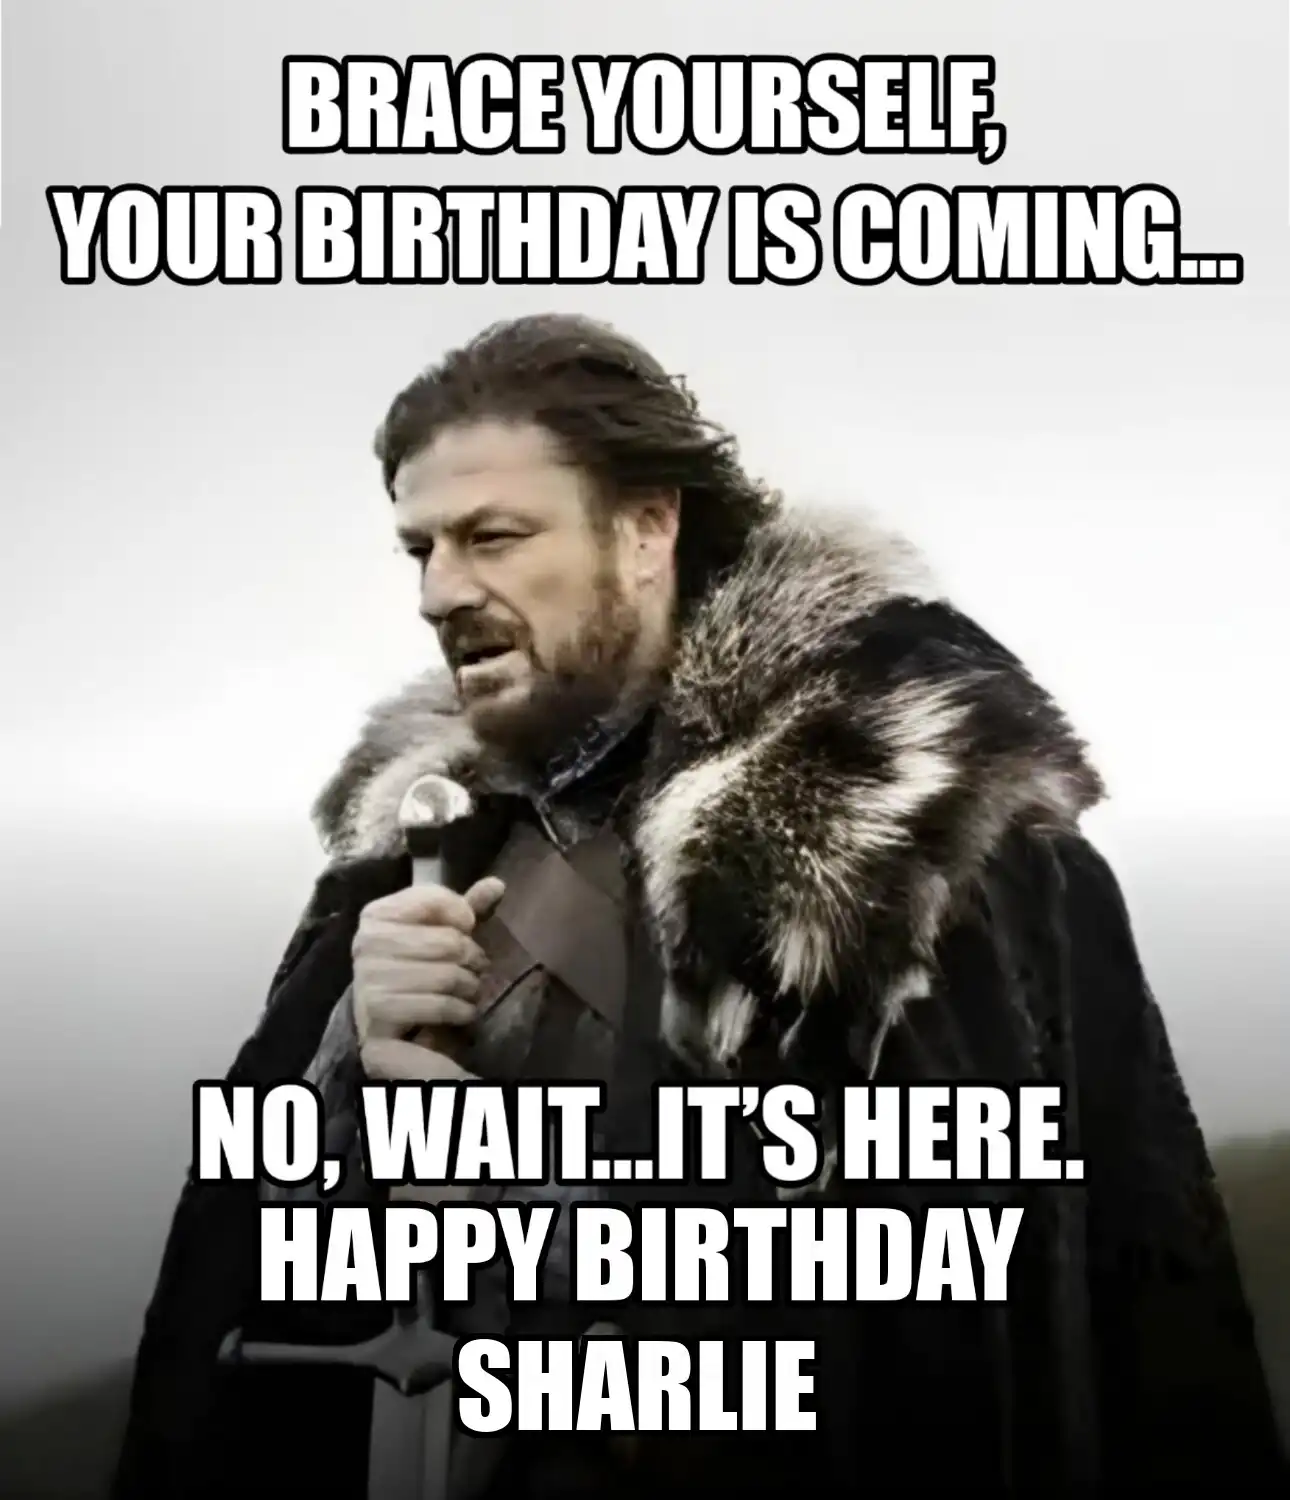 Happy Birthday Sharlie Brace Yourself Your Birthday Is Coming Meme